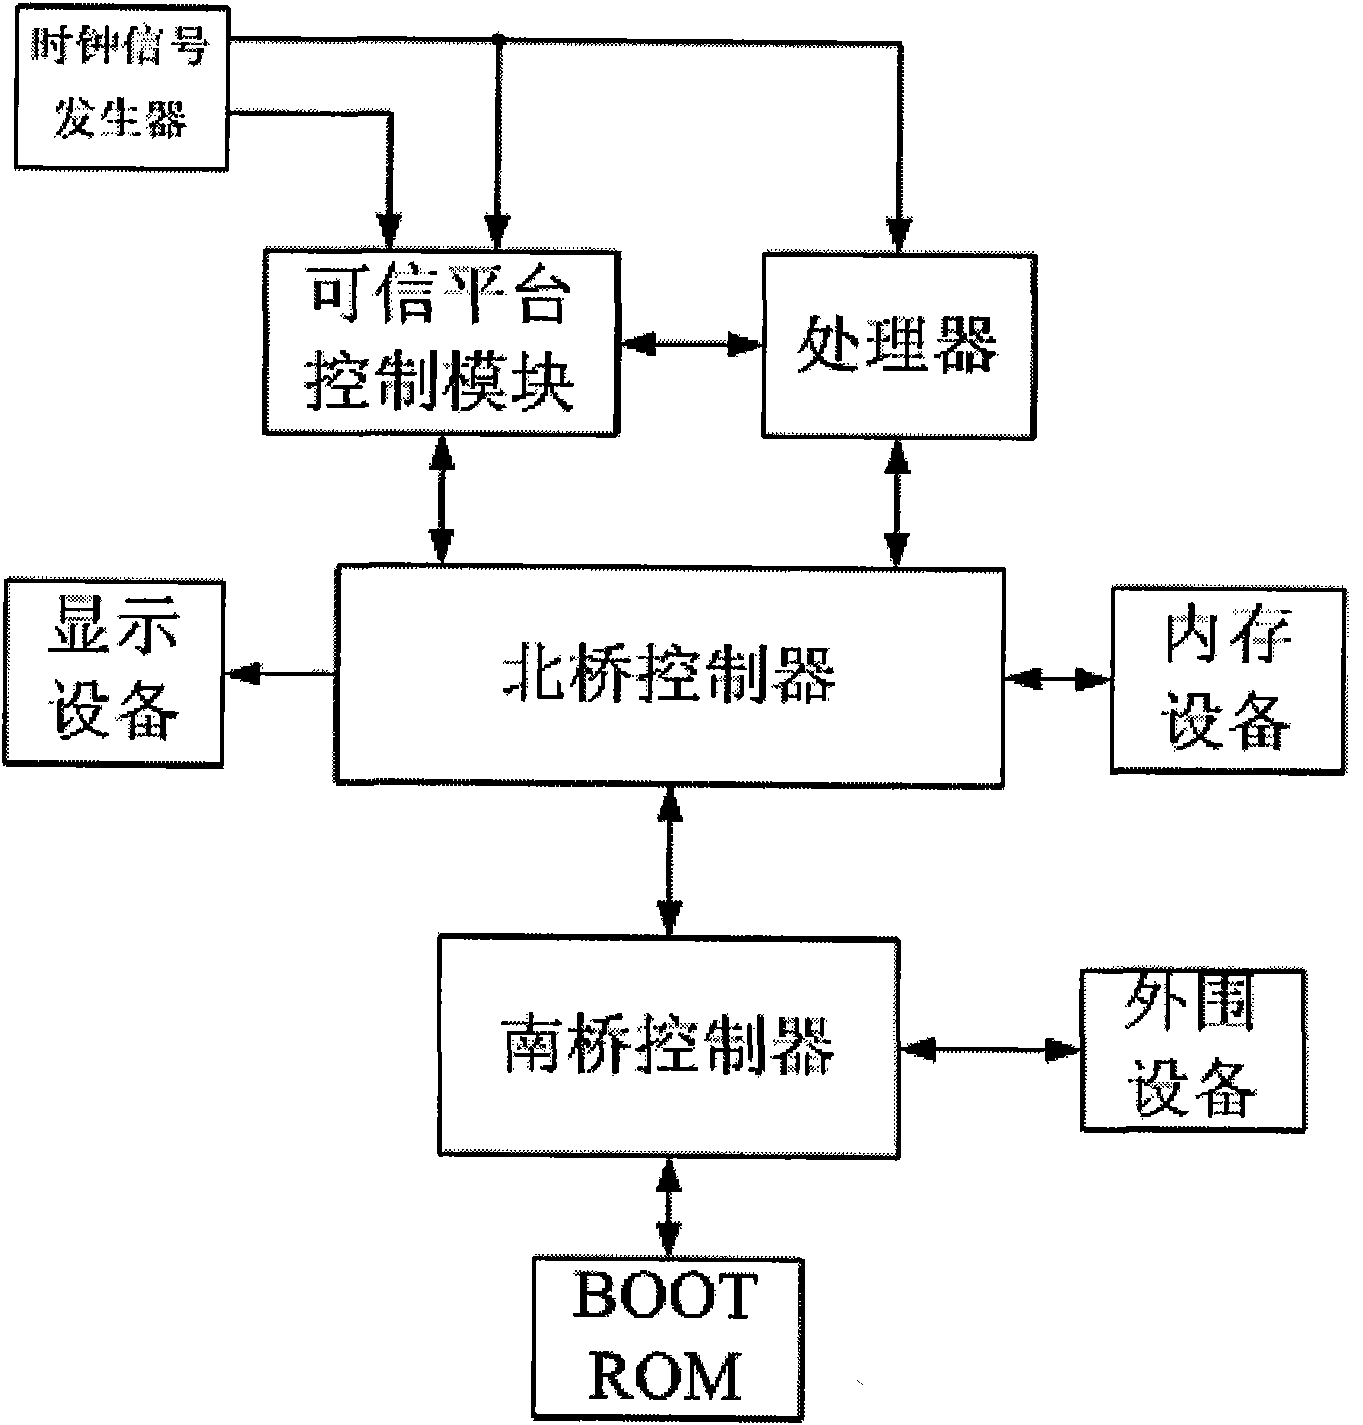 Trusted computing platform and method for verifying trusted chain transfer